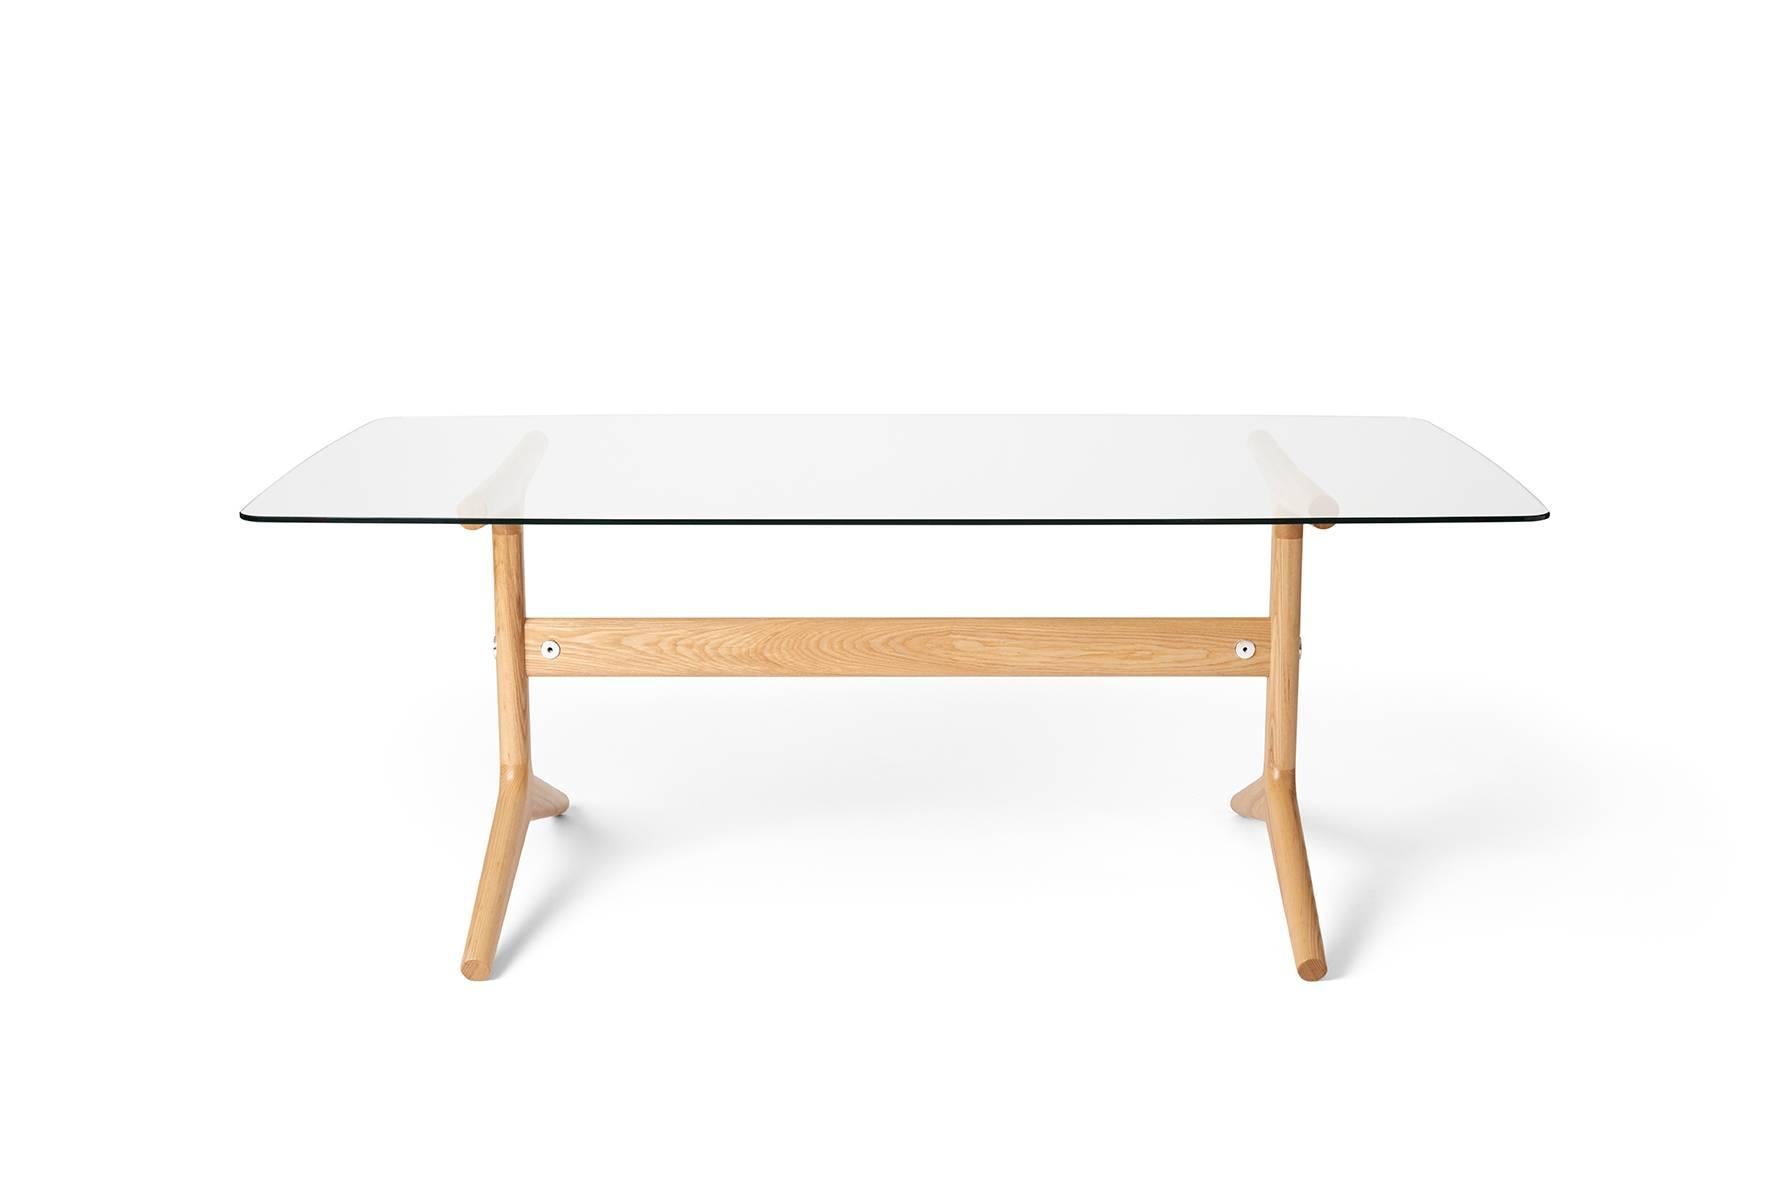 The 404 linear table has a hand formed base composed of North American Ash with mirror-polished aluminum fittings. Its linear boat-shaped top in tempered glass comfortably seats six. Well suited as a dining or writing table. 

Measures: H 29